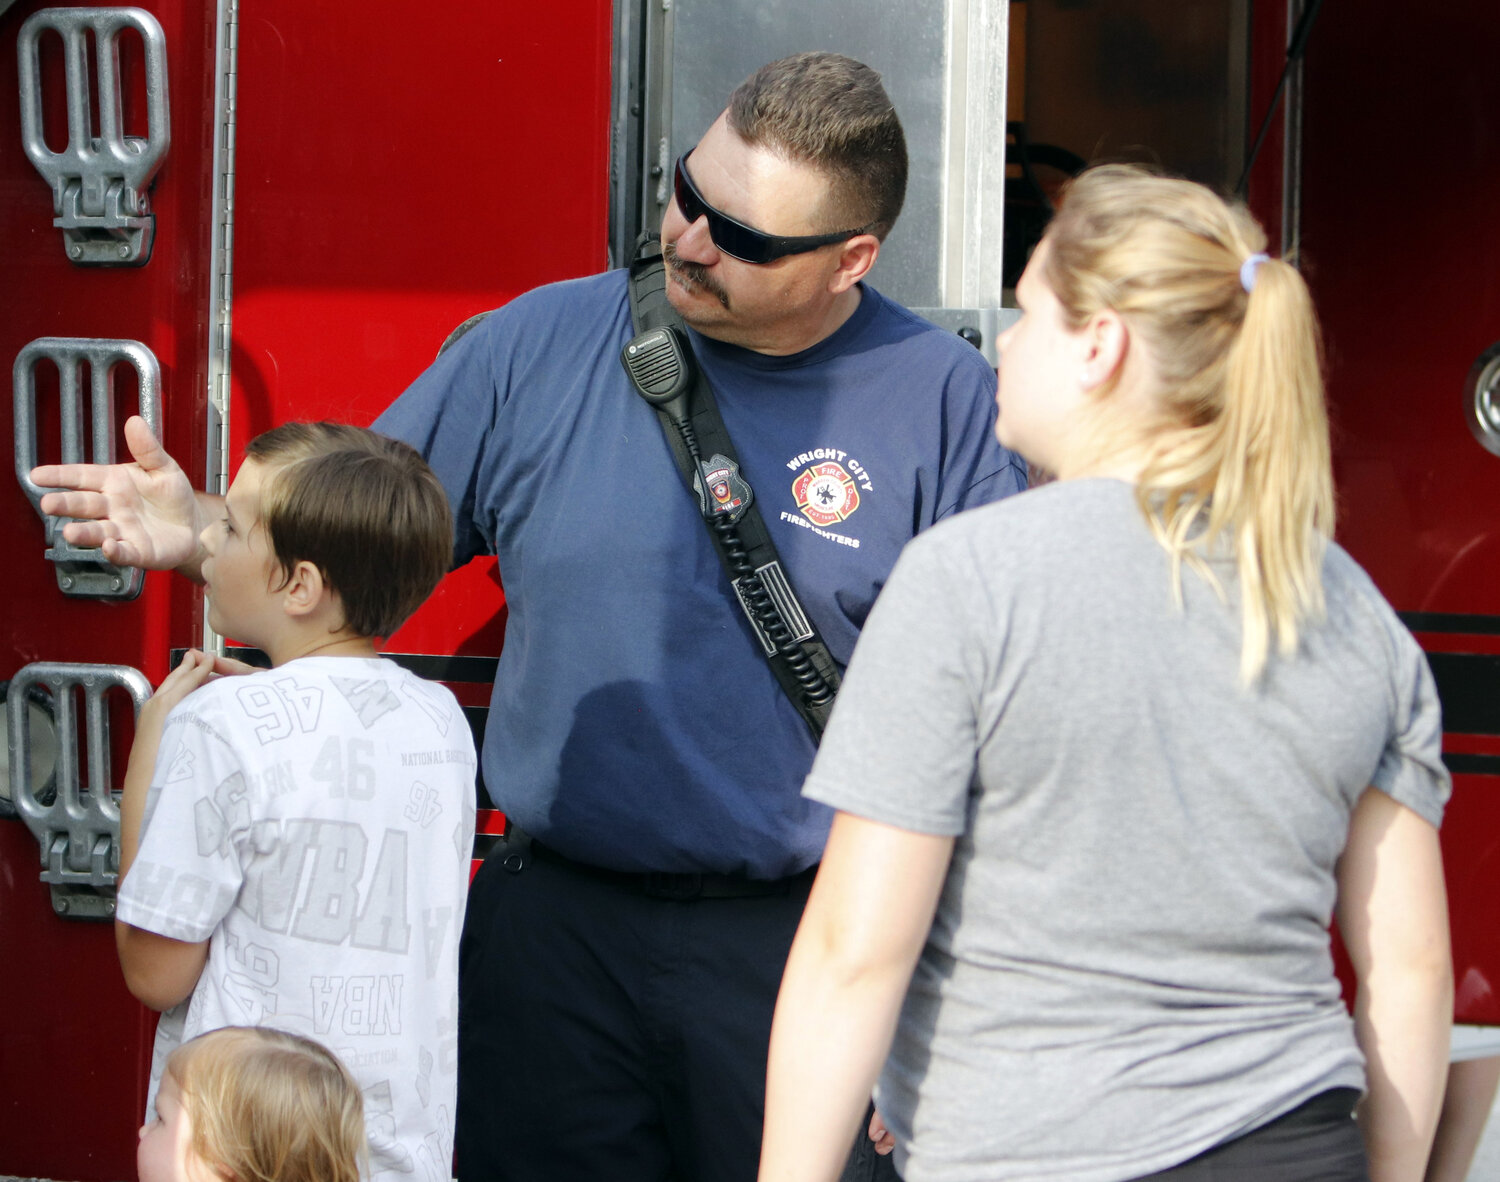 The National Night Out event in Wright City brought out residents of Warren County to meet their first responders.